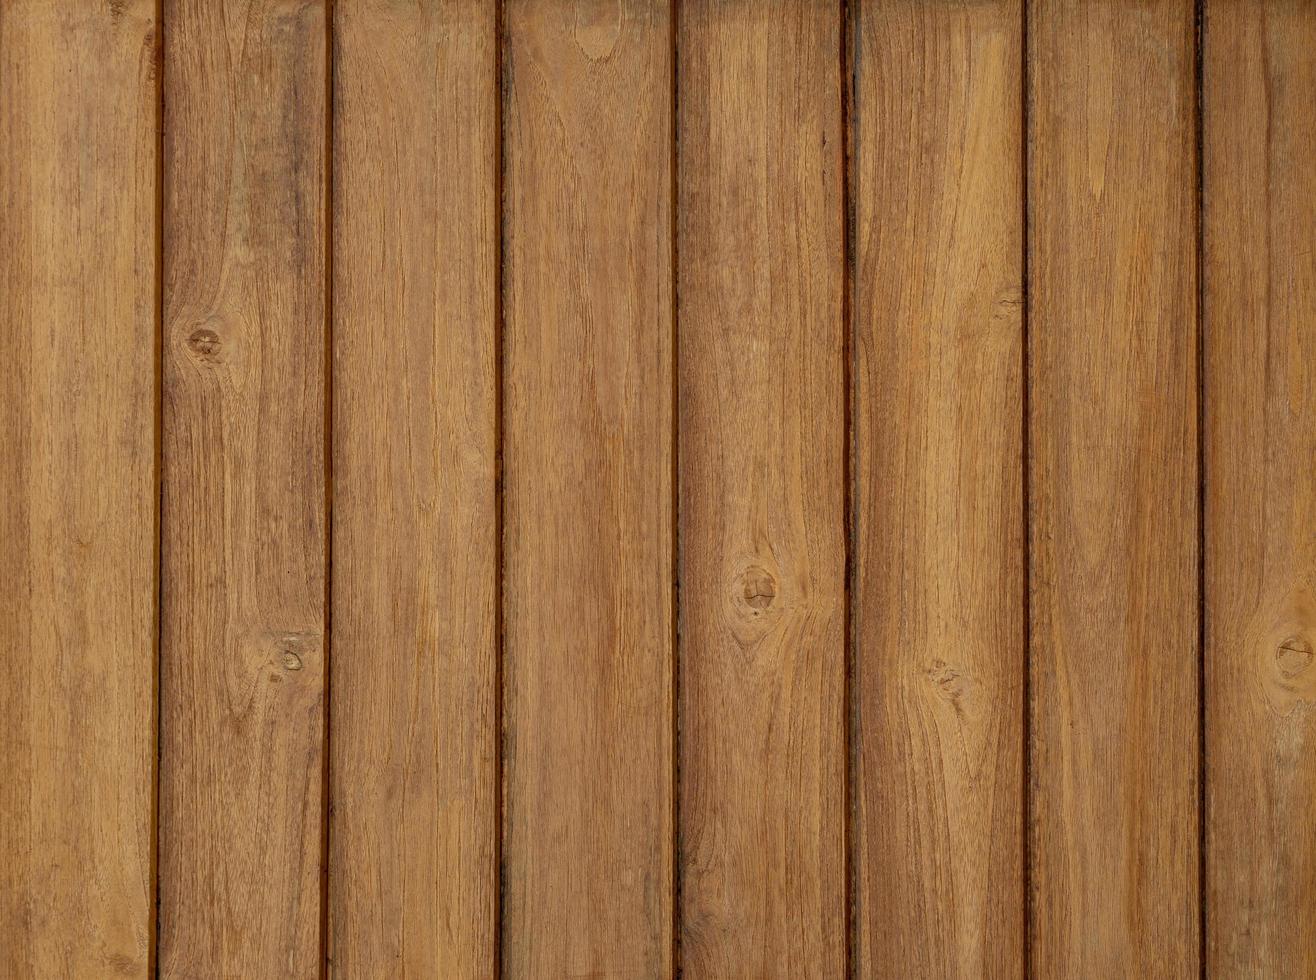 Natural rustic teak wood wall surface background for vintage design purpose photo